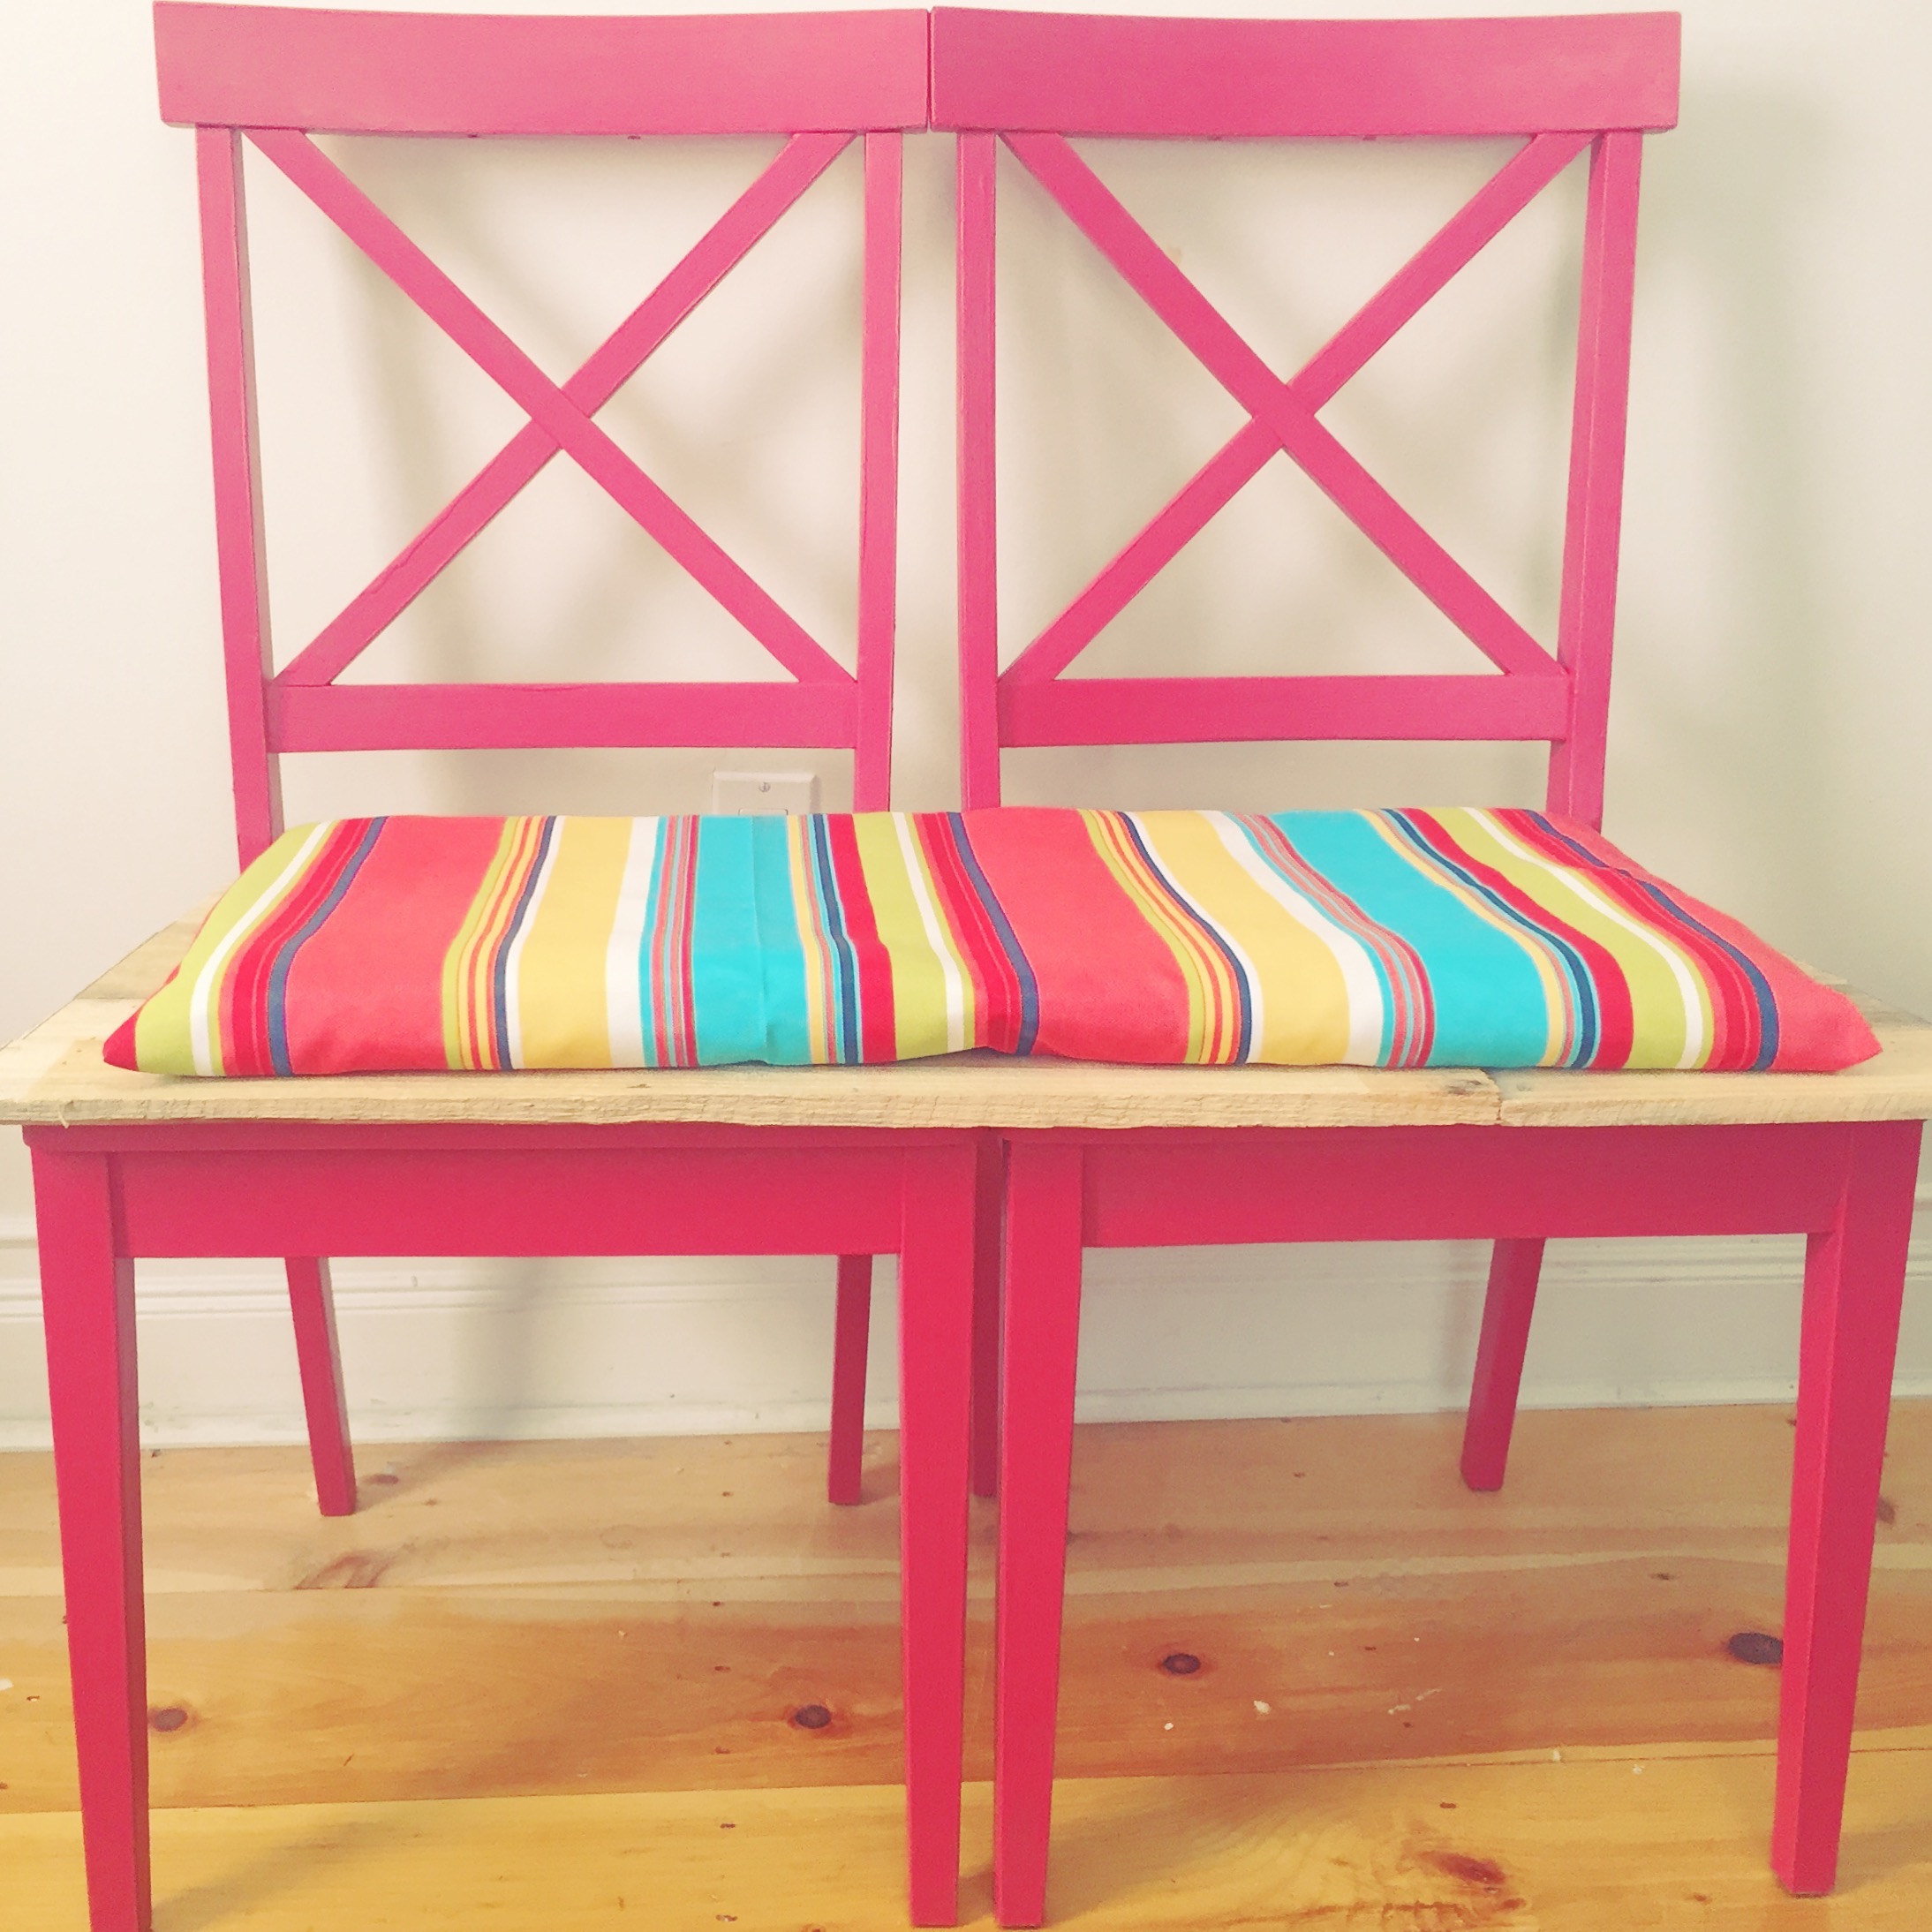 Chair pallet bench upcycle MyFixitUpLife pink